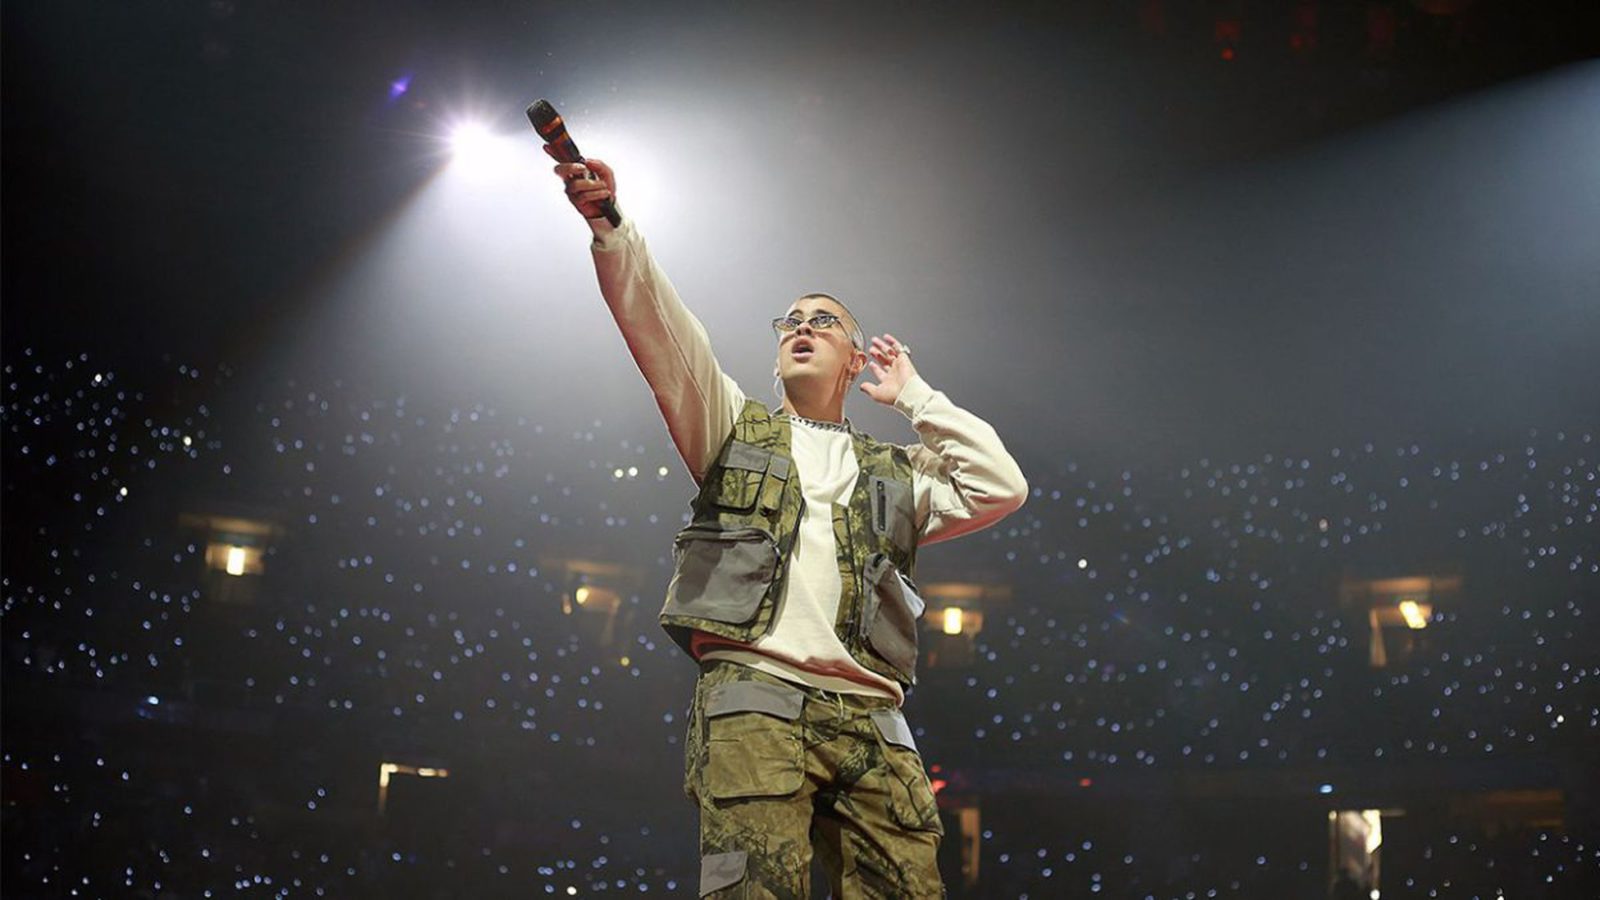 What to Know About the Bad Bunny Concert 2022